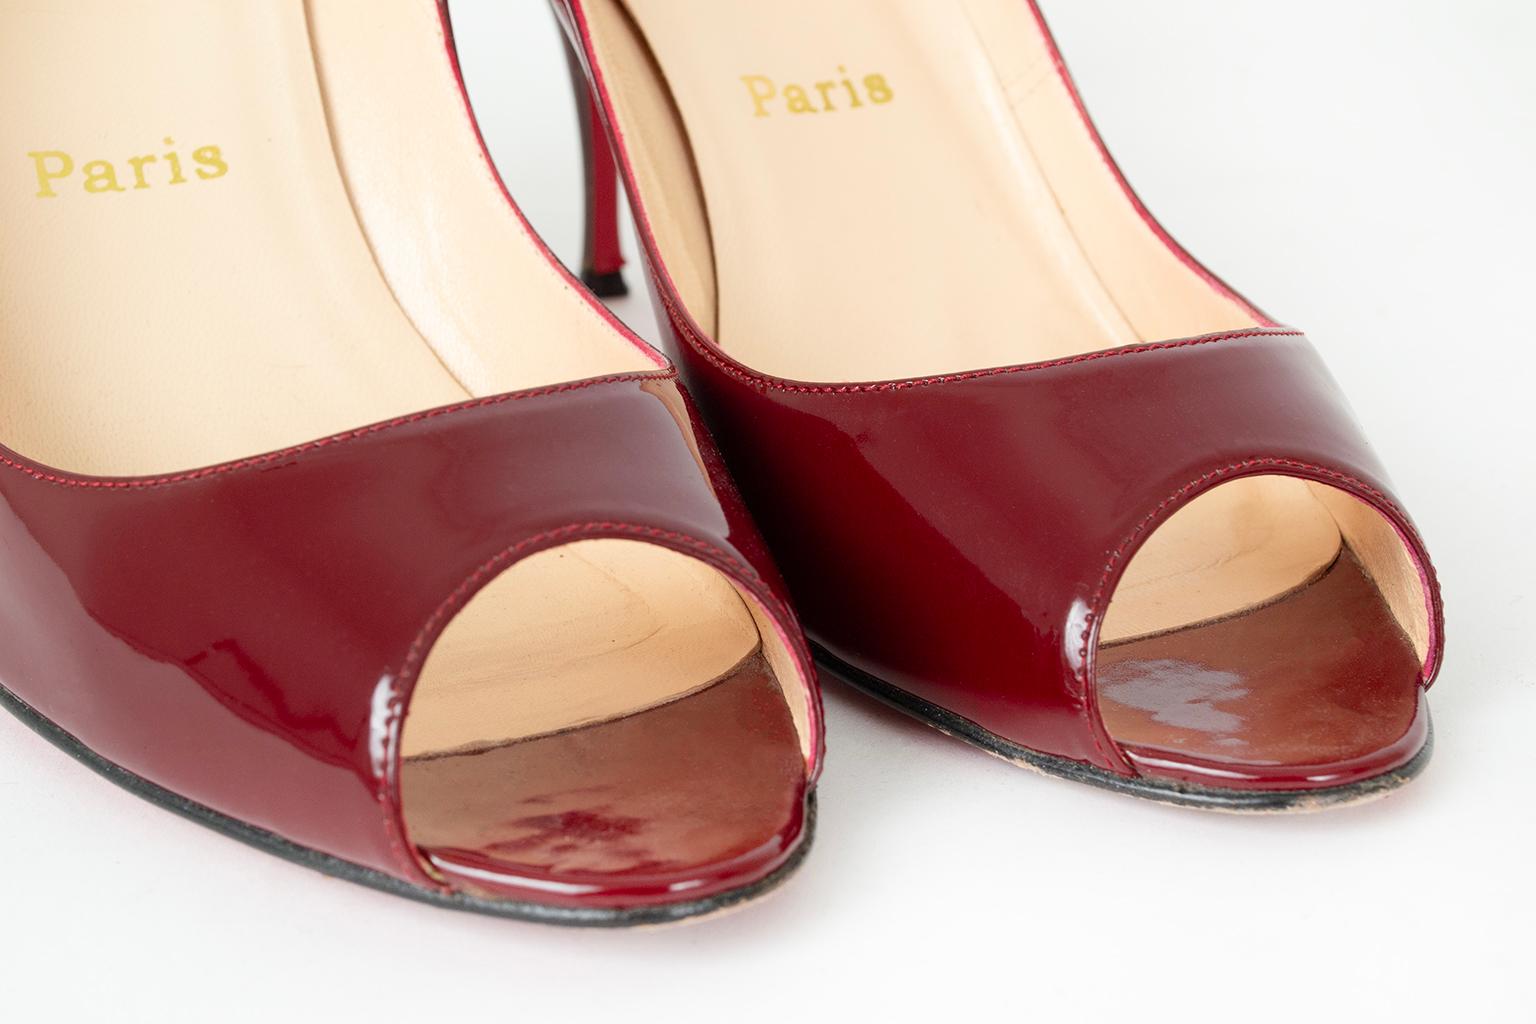 Christian Louboutin Burgundy Patent Clare Peep Toe Stiletto, 80 mm - 39, 2002 For Sale 3